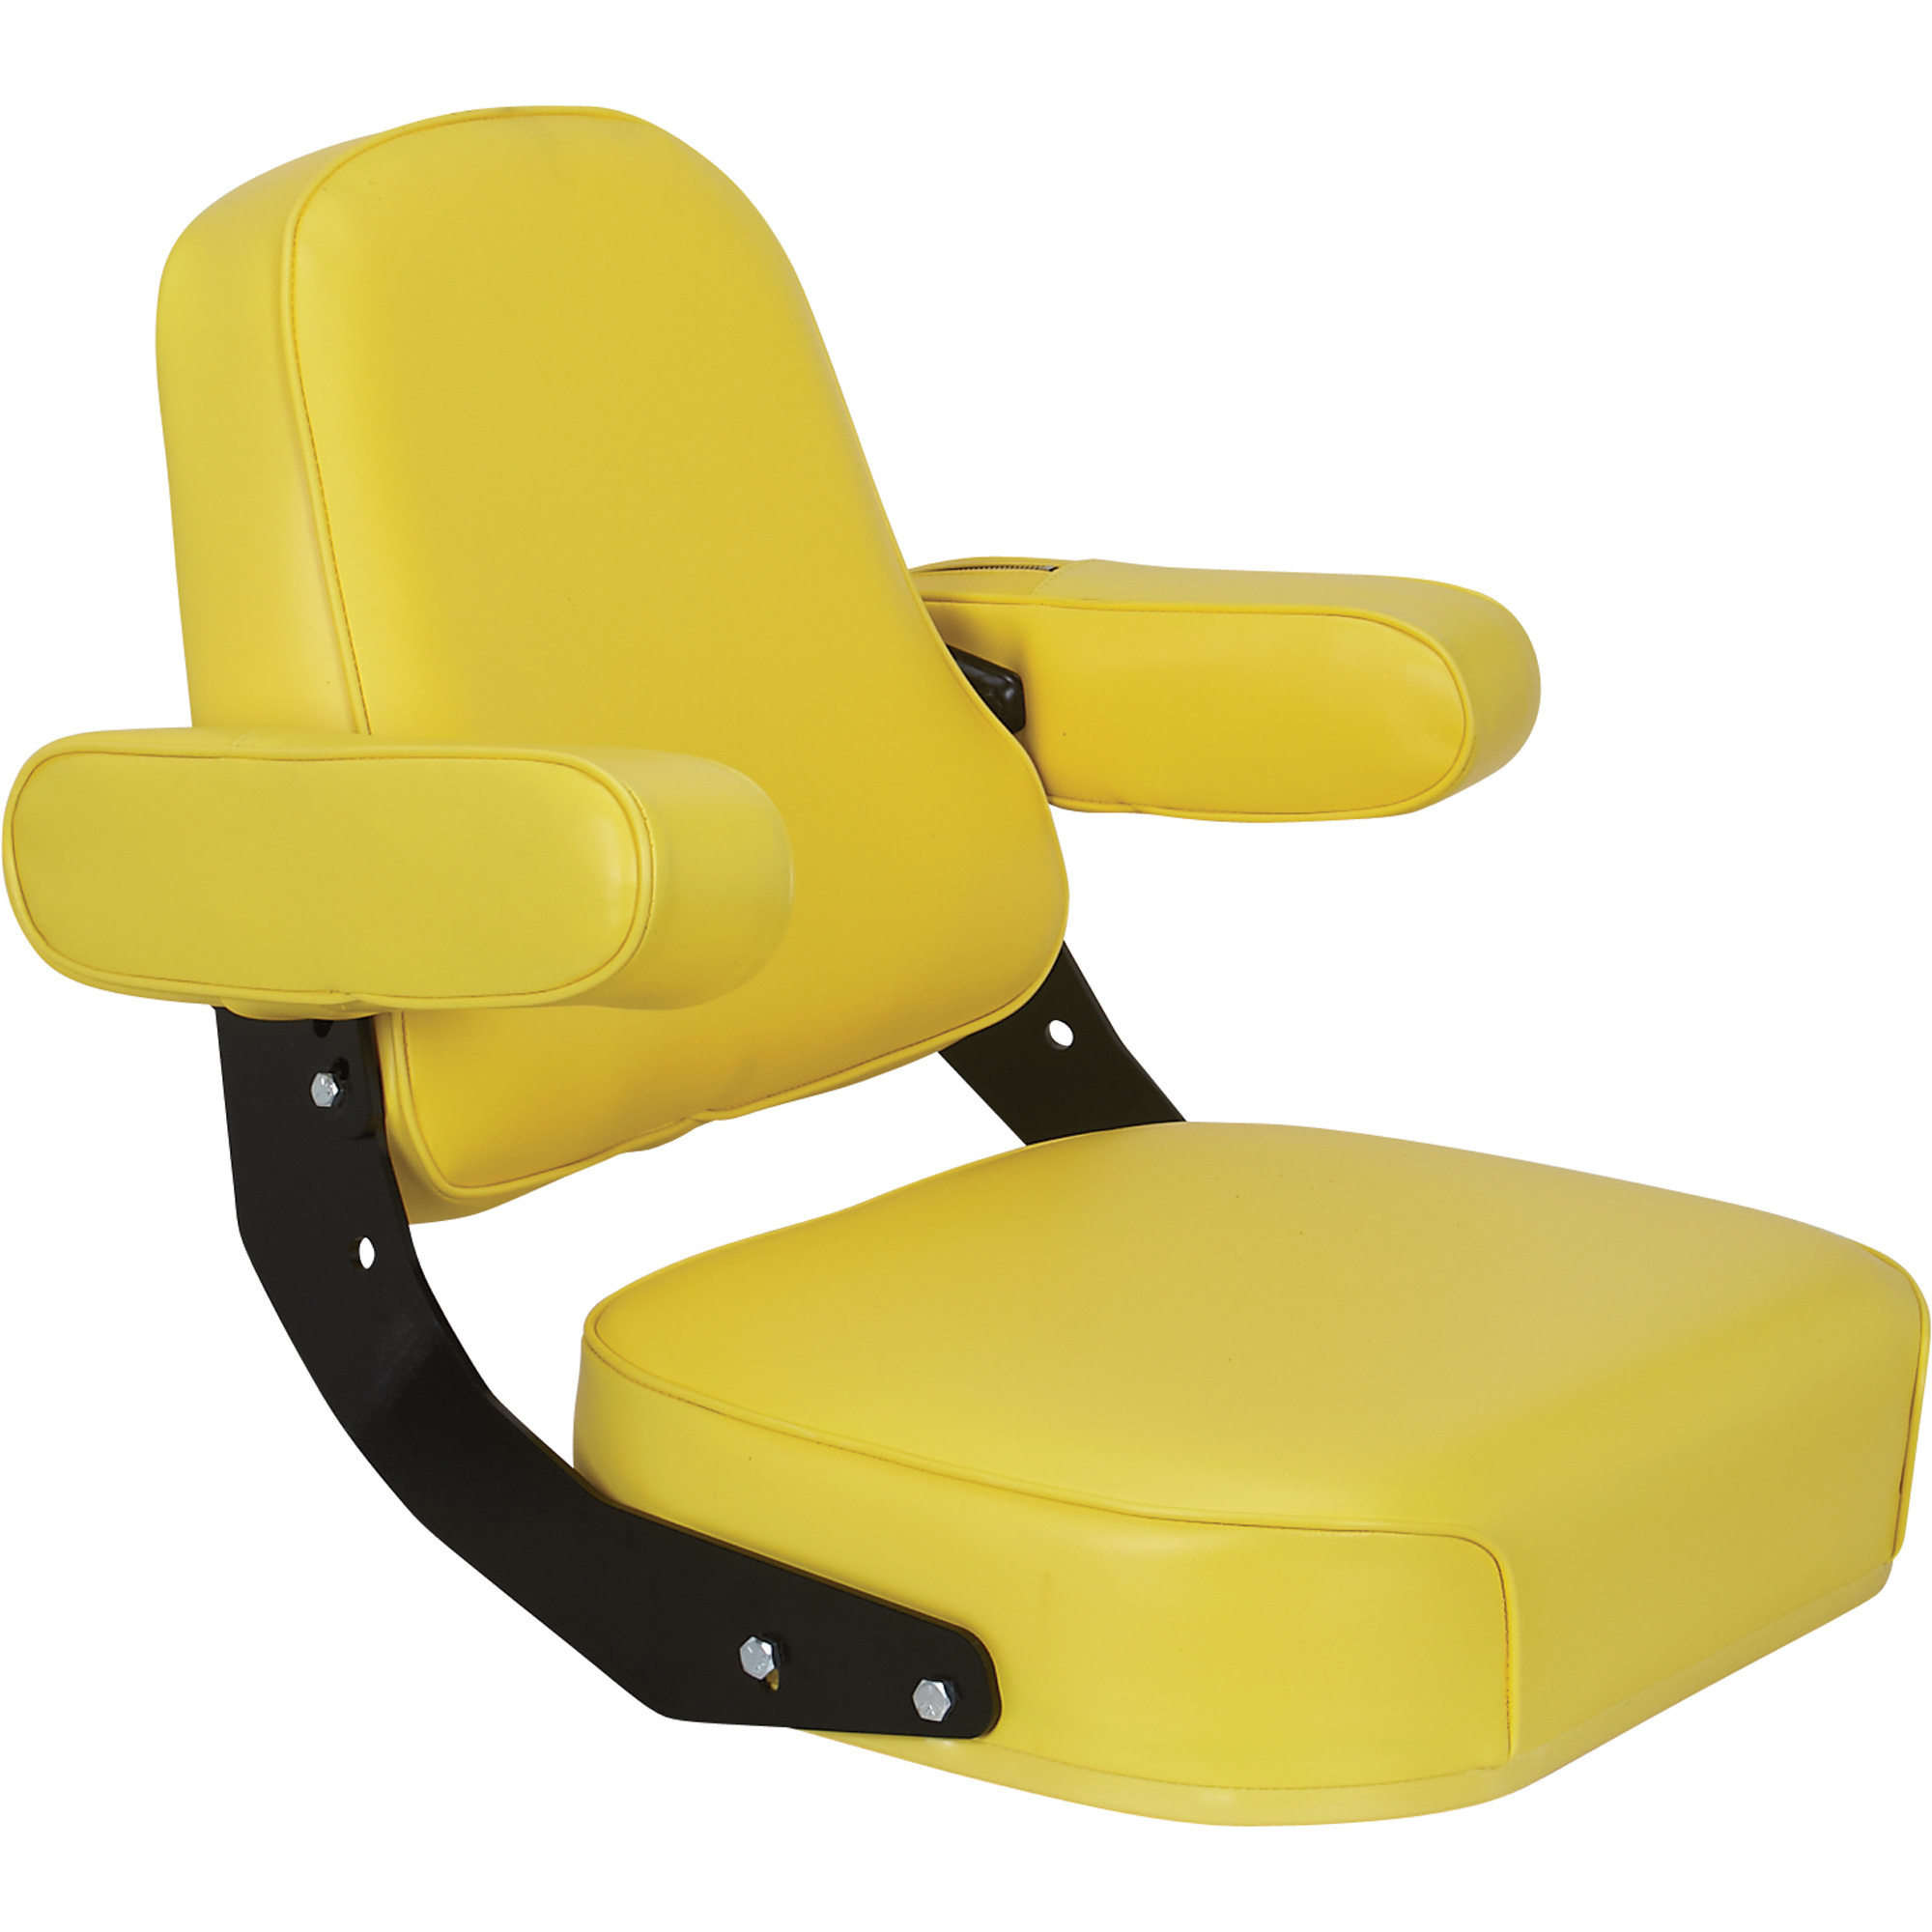 K & M Mfg Super Deluxe Seat Assembly for John Deere 10 and 20 Series Tractors, Yellow, Model 7200